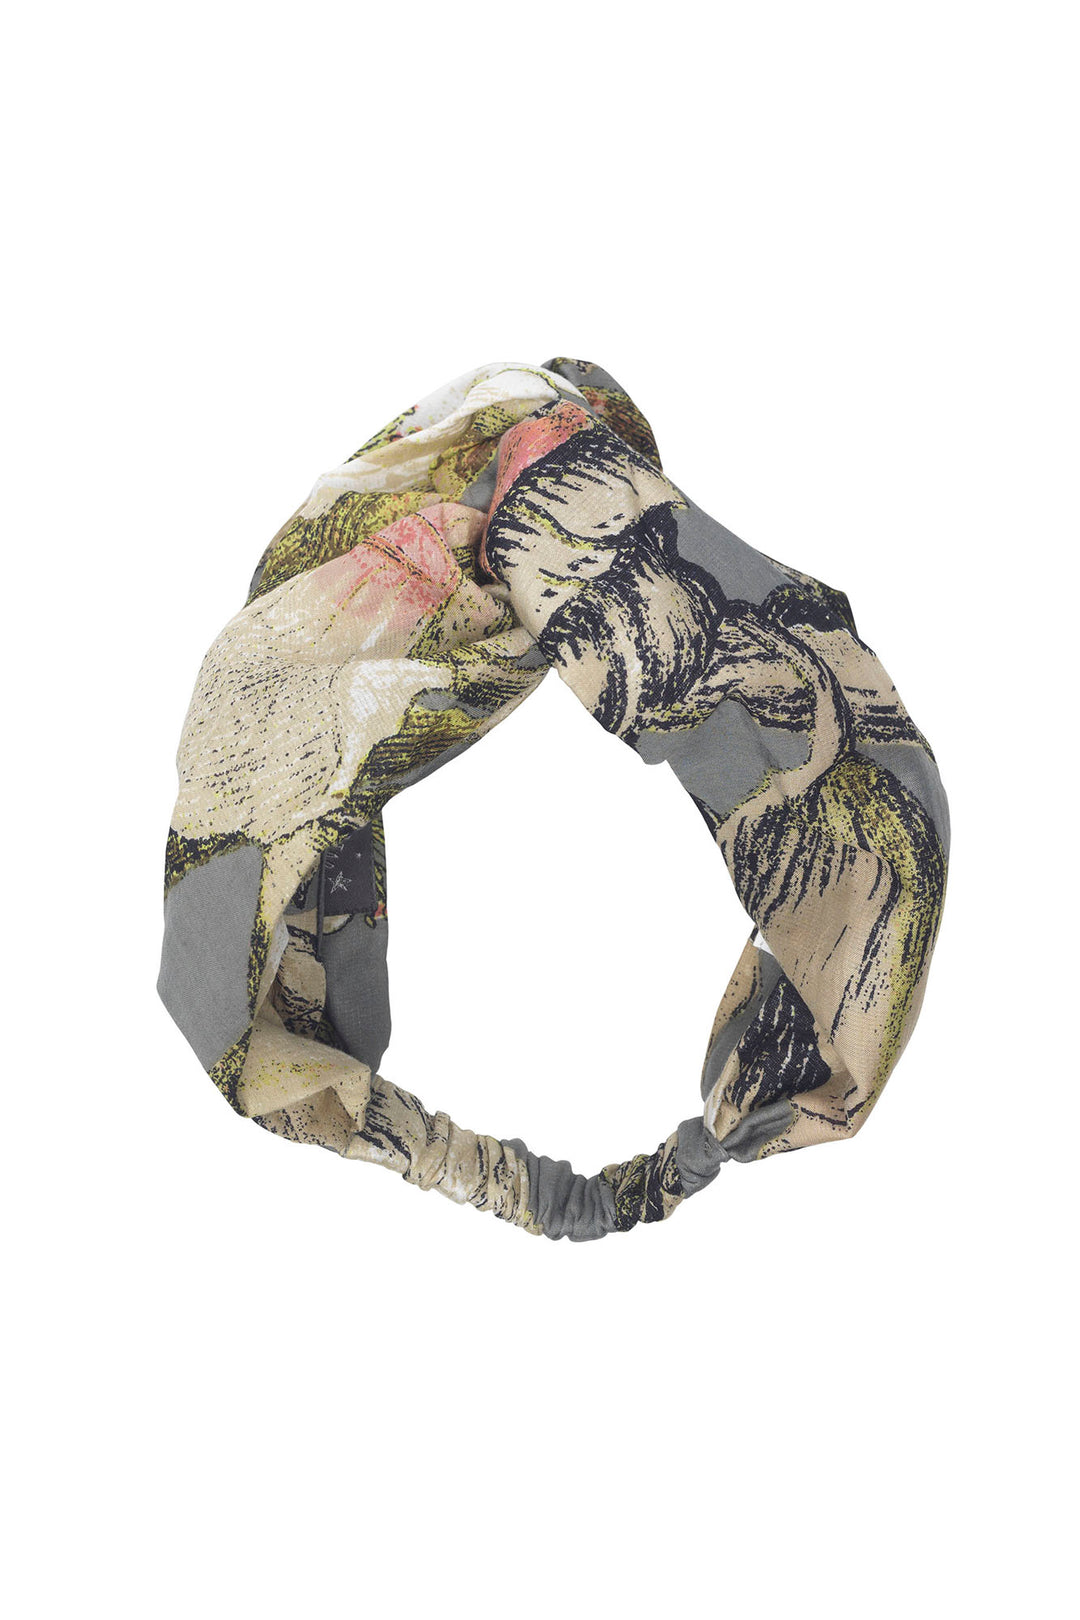 KEW Iris Grey Headband- Our headbands are made from 100% recycled material using offcuts from our clothing production.